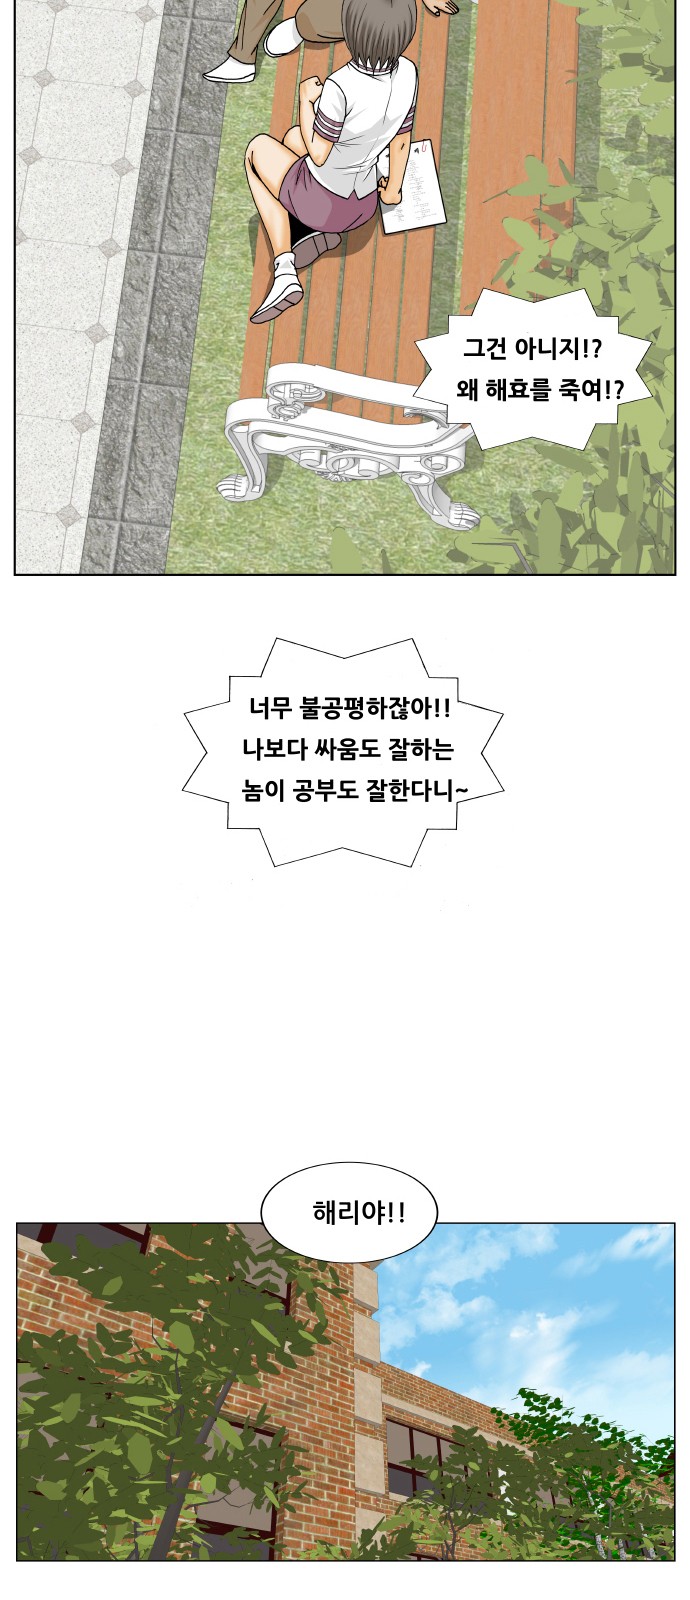 Ultimate Legend - Kang Hae Hyo - Chapter 270 - Page 3